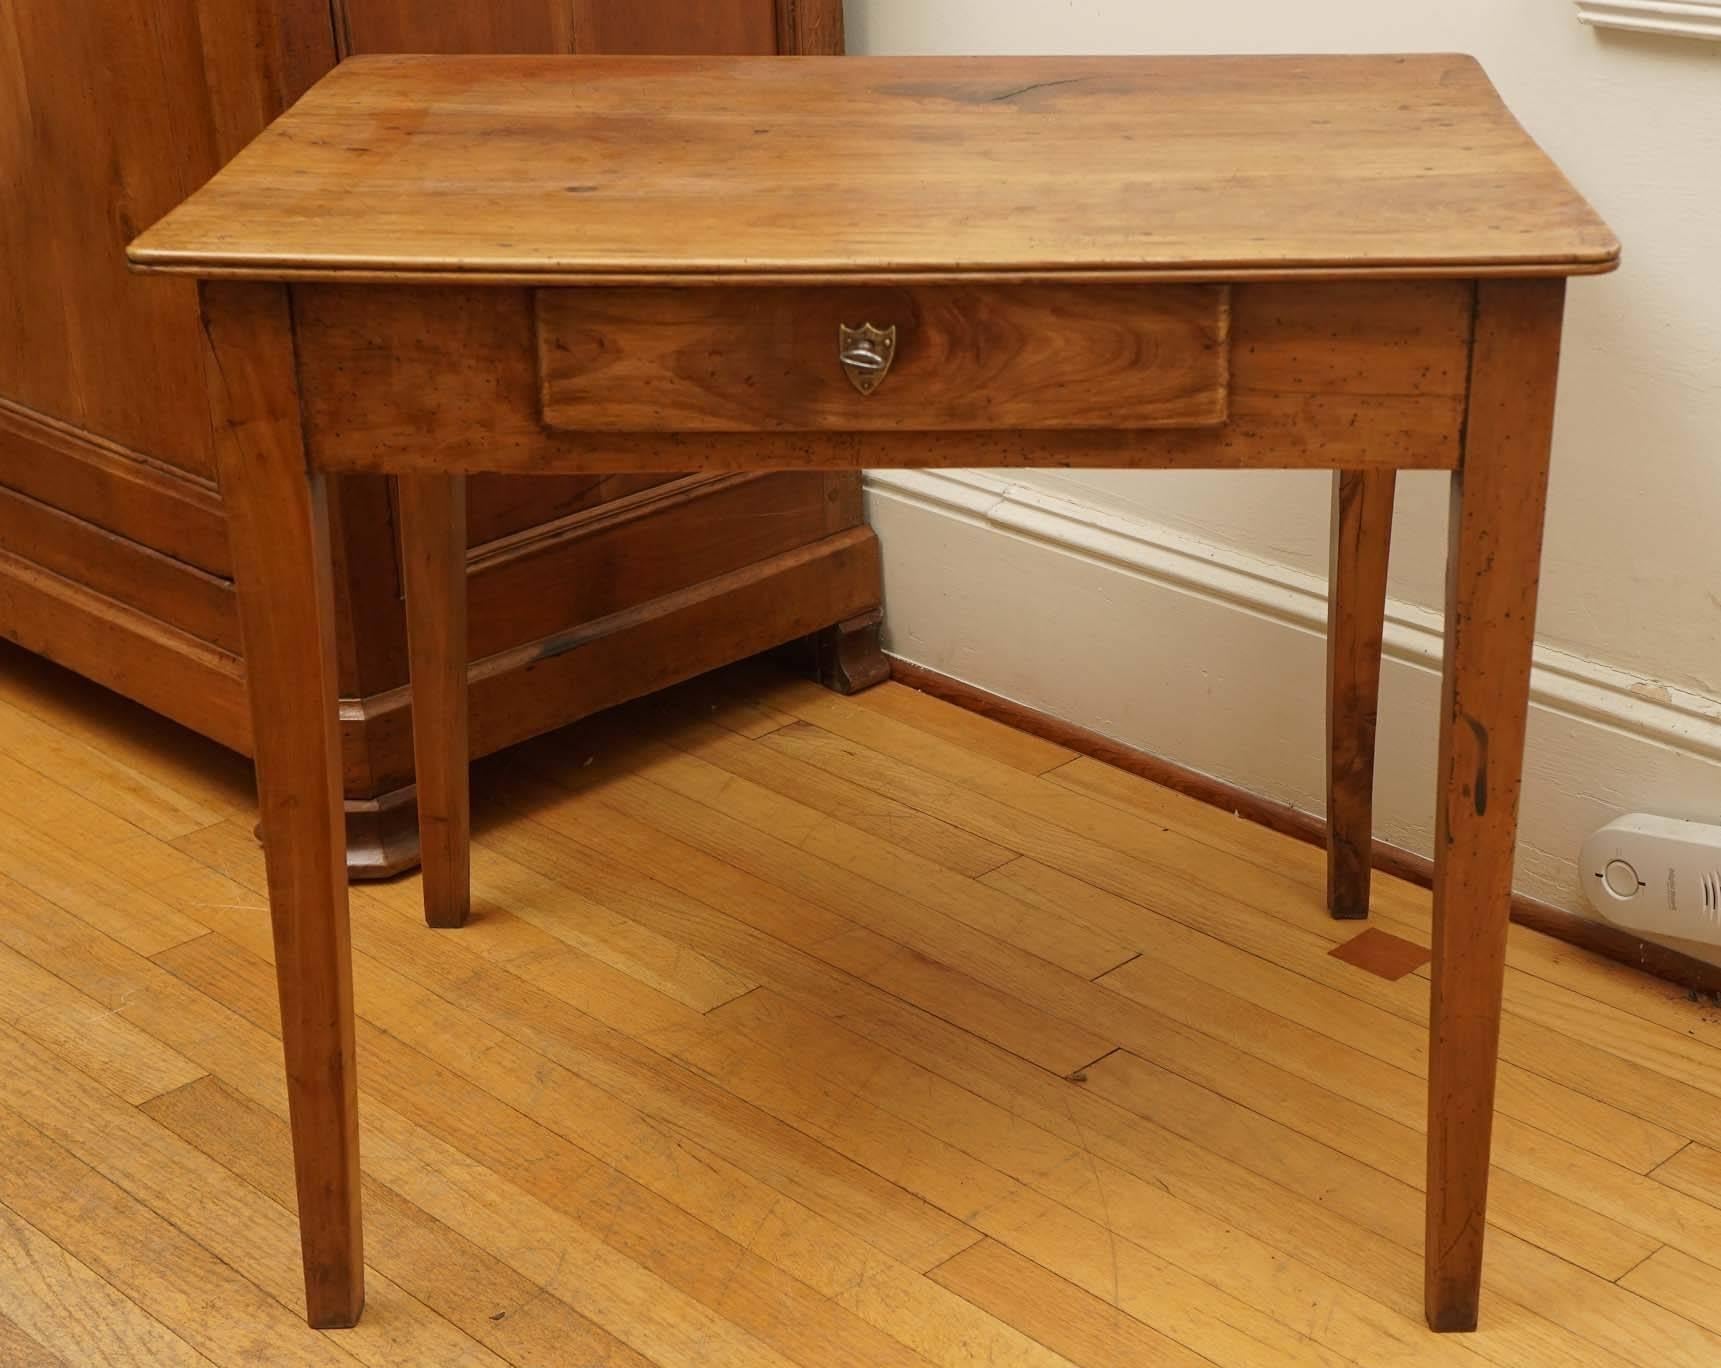 This end or side table has a rich walnut wood finish and would be perfect for an end table or night table. The top is particularly nice and a good sized drawer is part of this table.